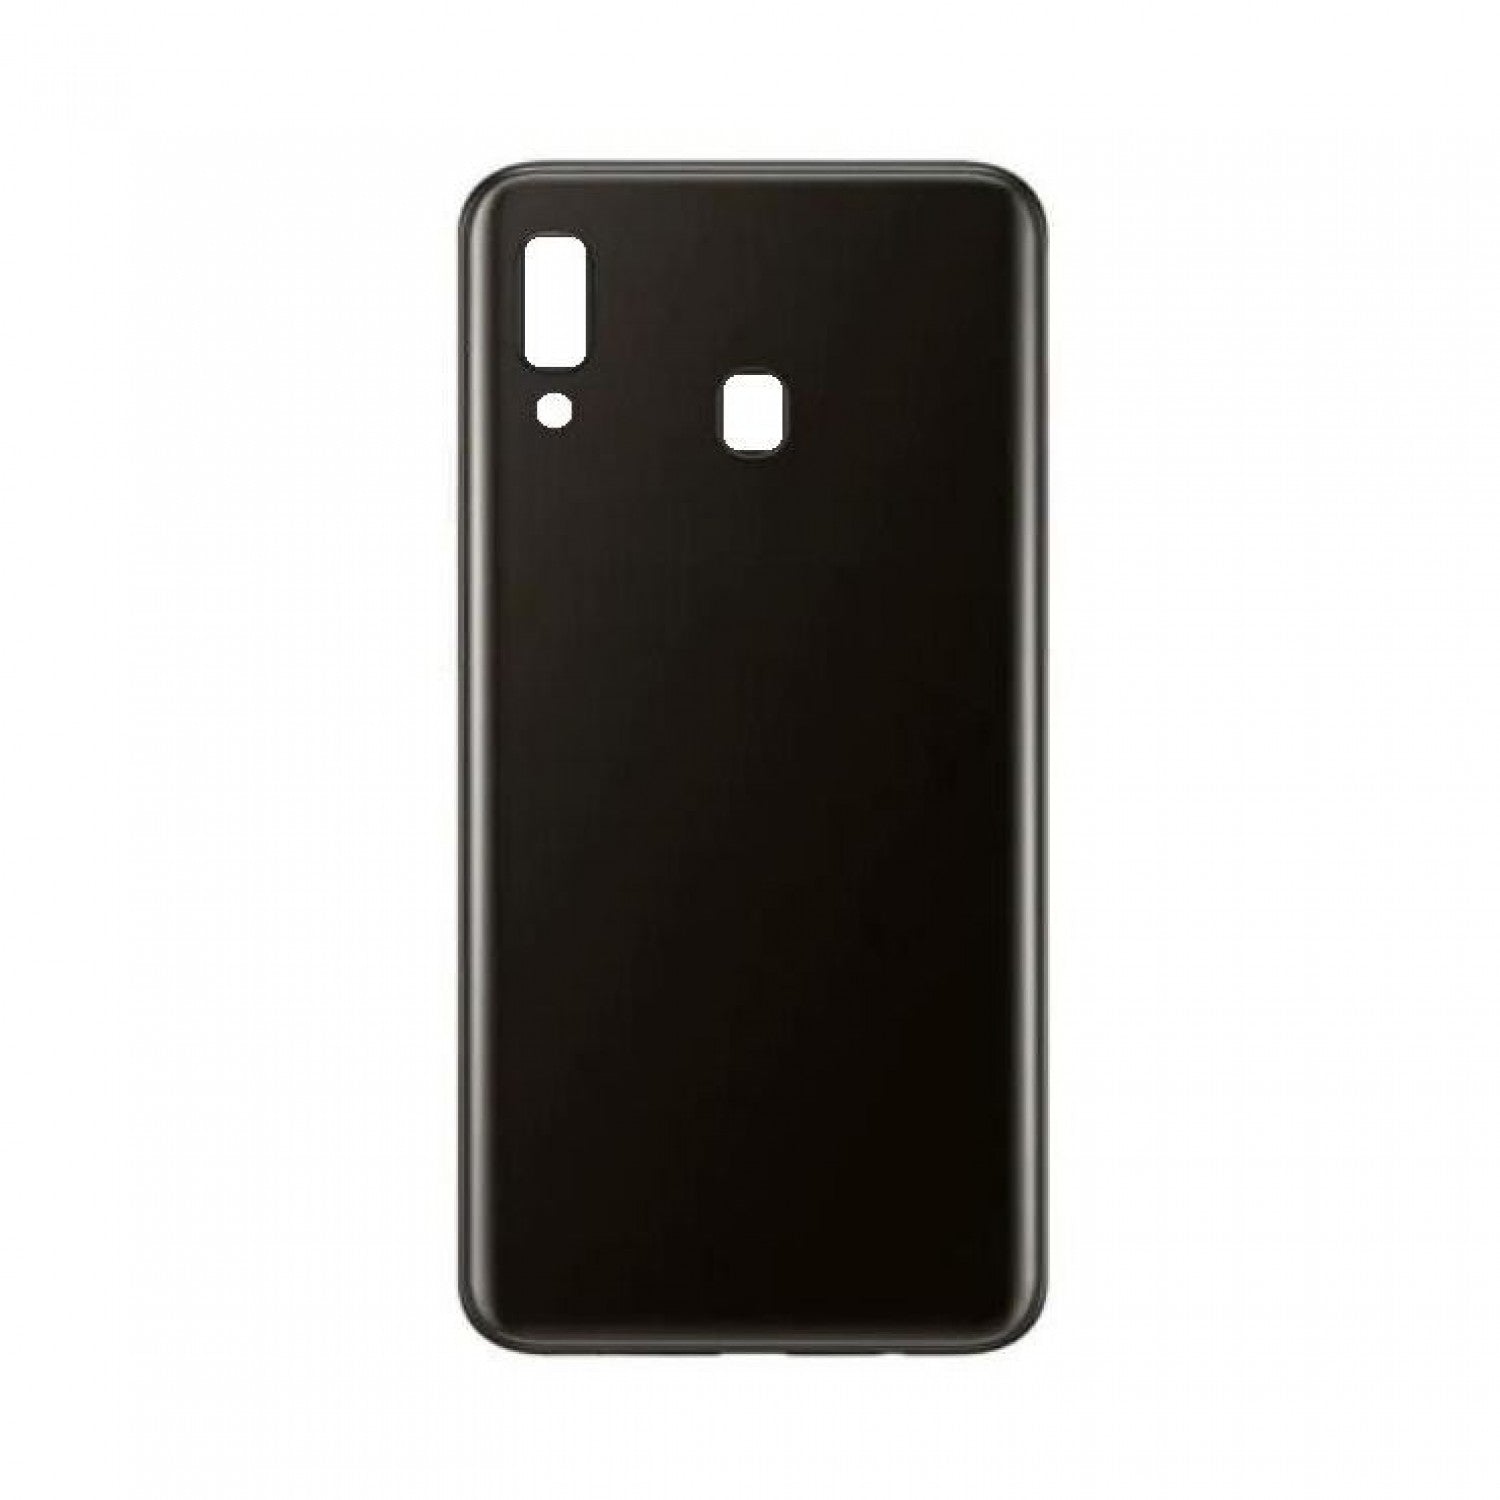 Samsung Galaxy A20 Back Glass Cover